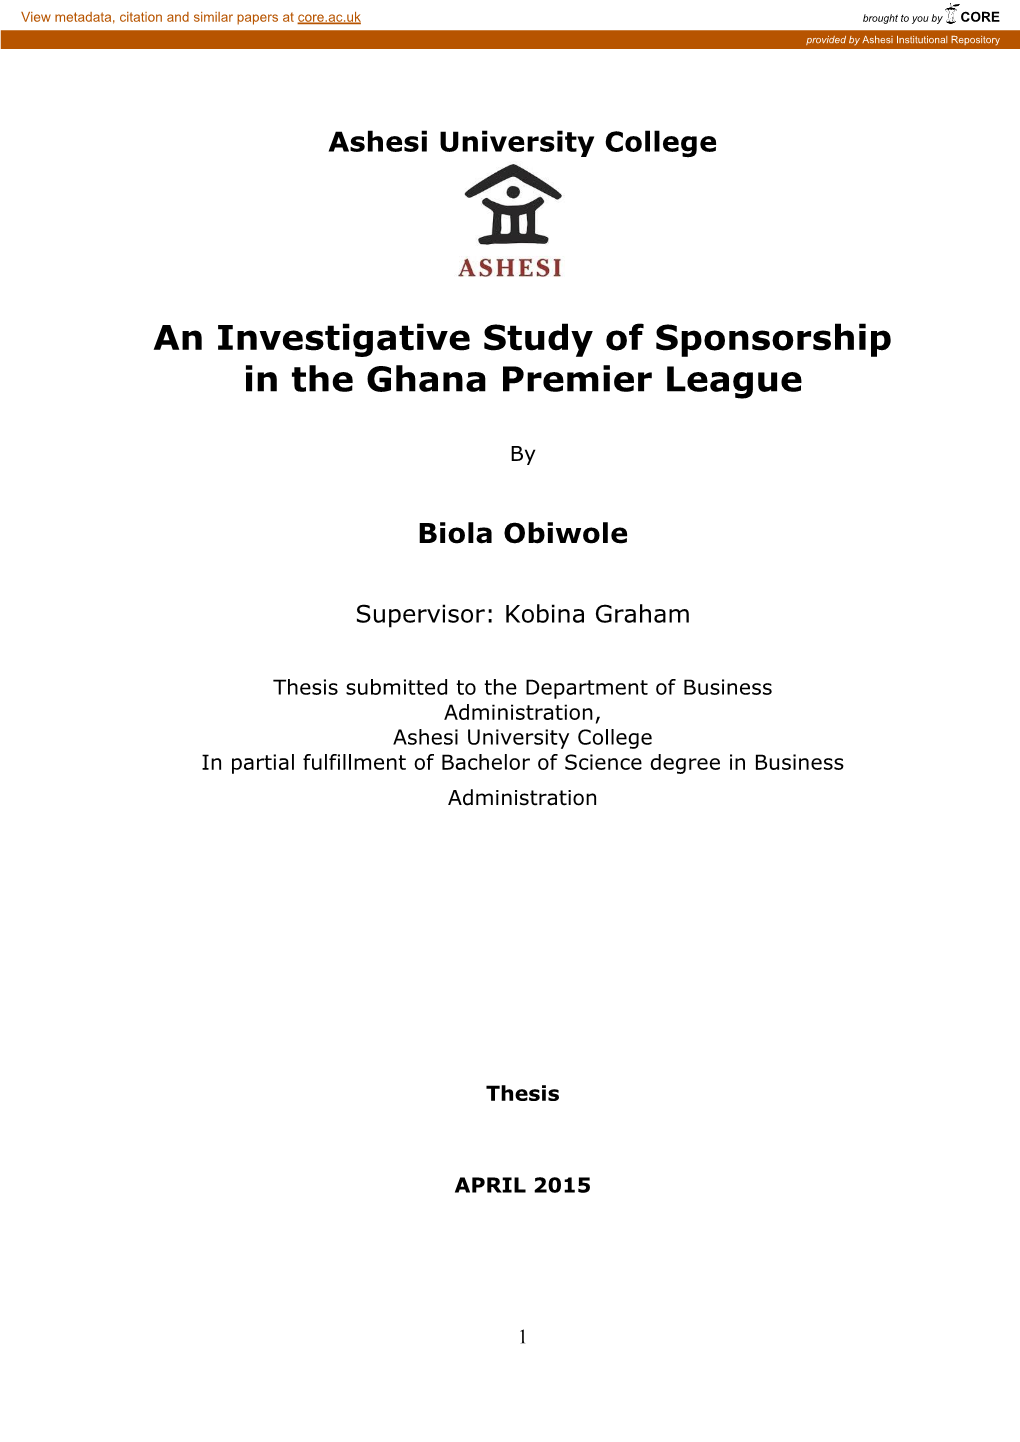 An Investigation on the Relationship Quality Between the Ghana Premier League and Its Sponsors